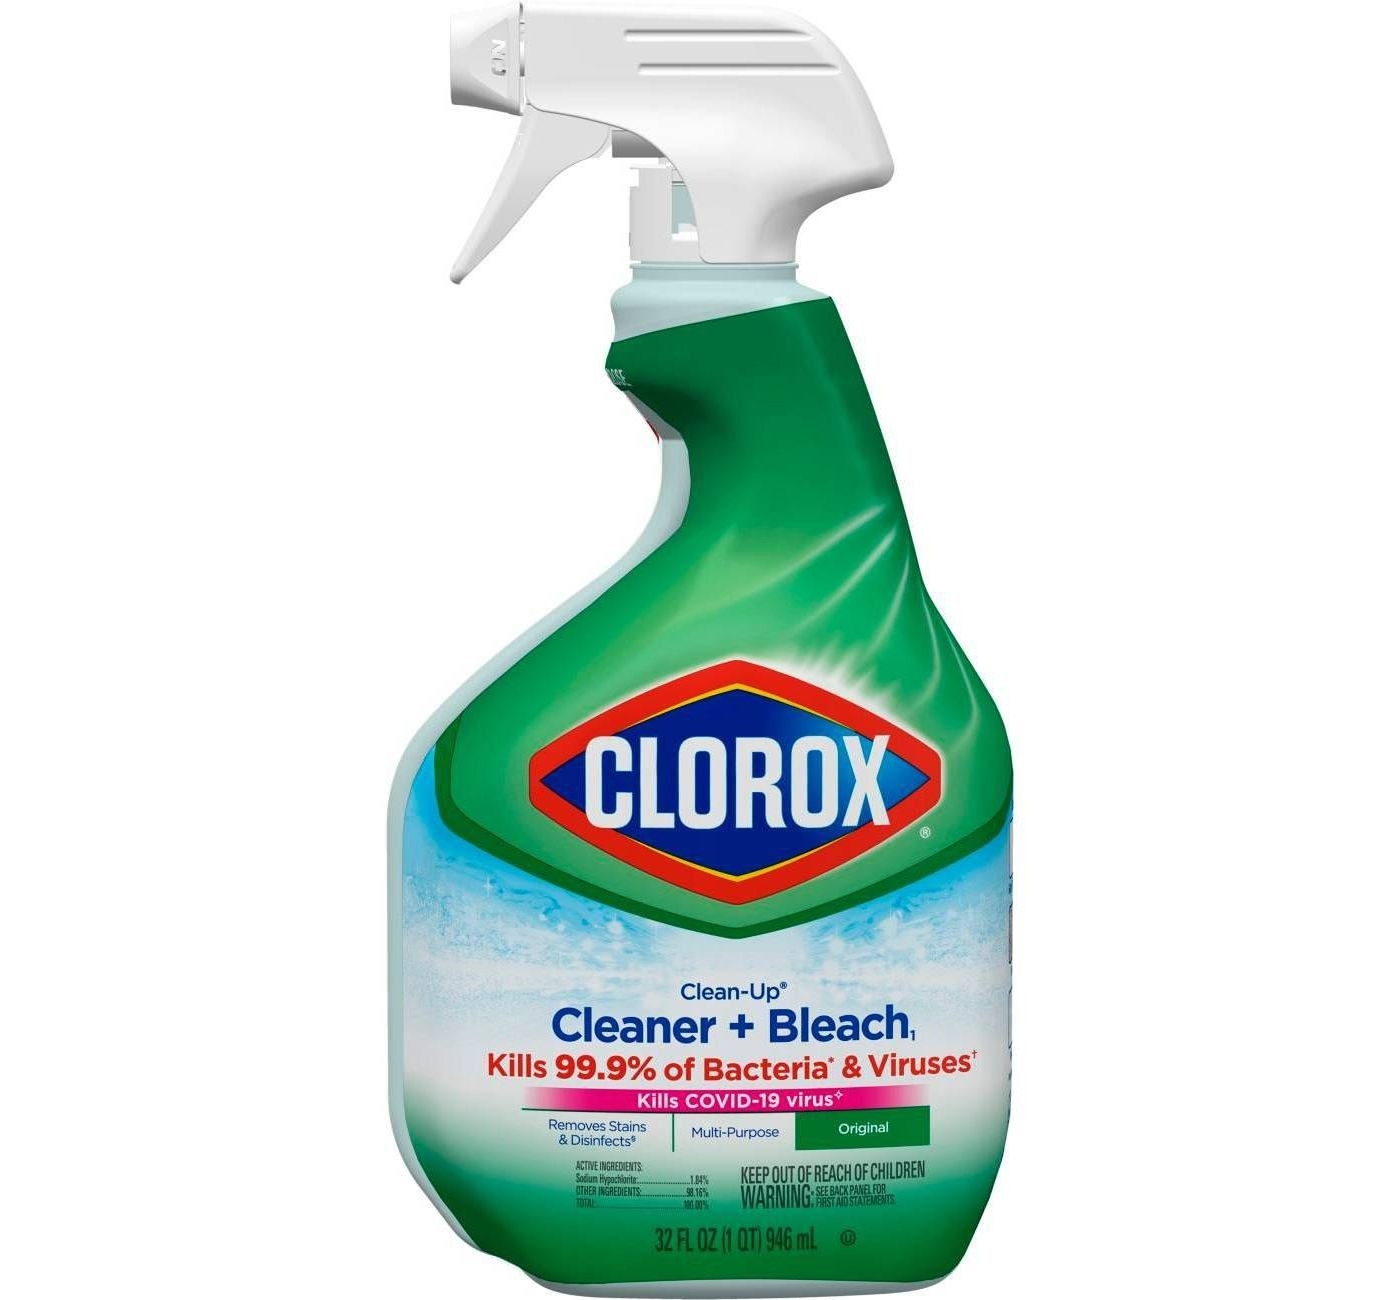 A blue, green, and red spray bottle of cleaner